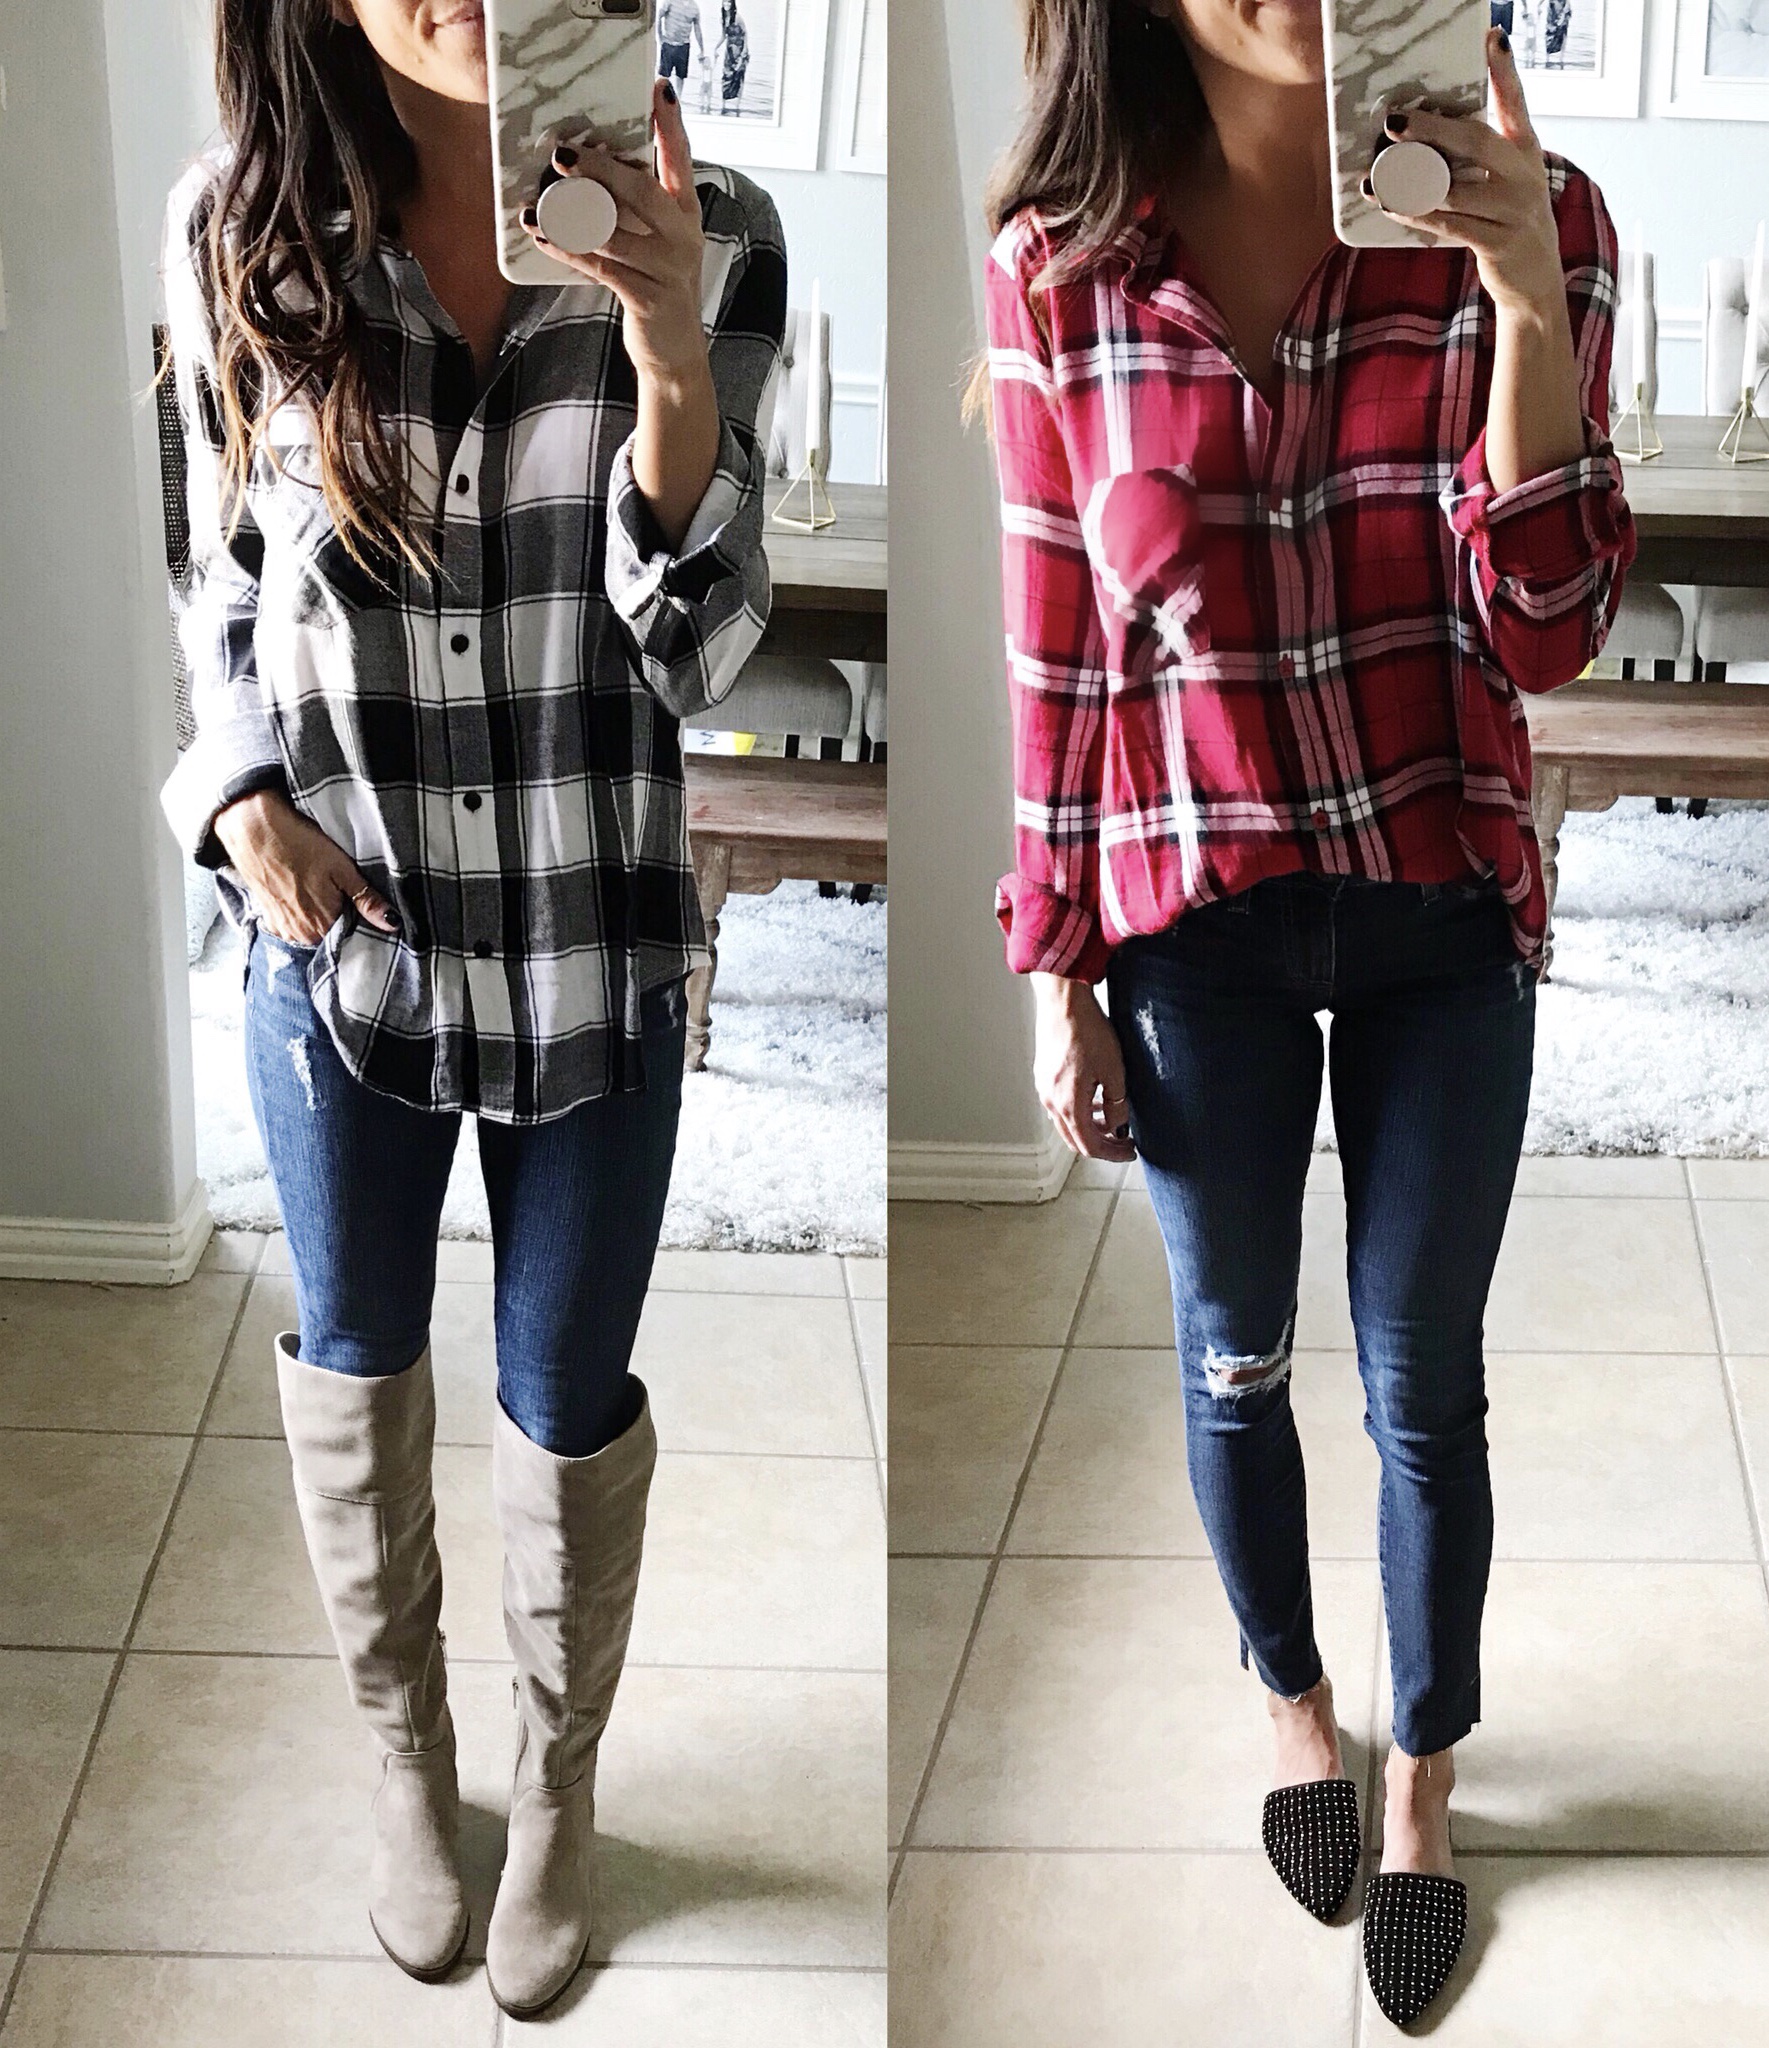 Plaid top, jeans, and boots.